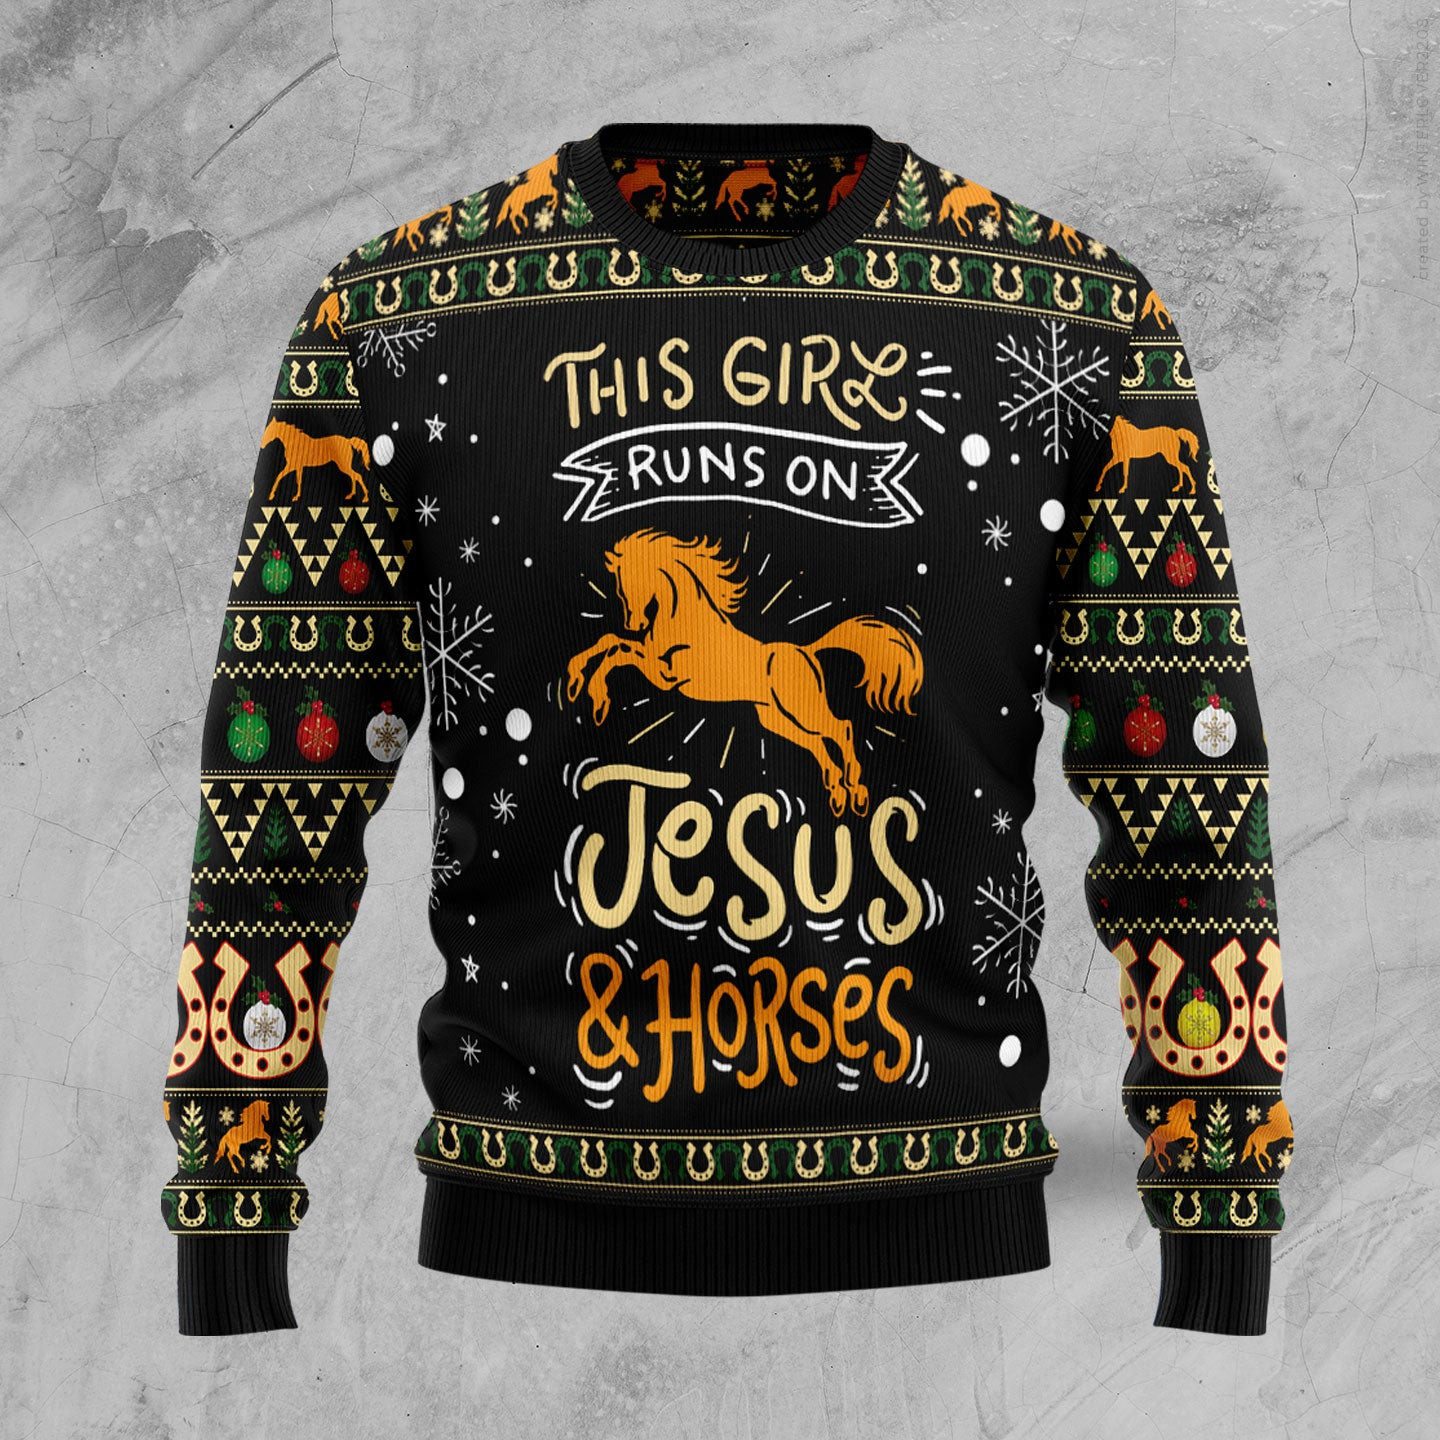 Girls run on jesus and horses Ugly Christmas Sweater